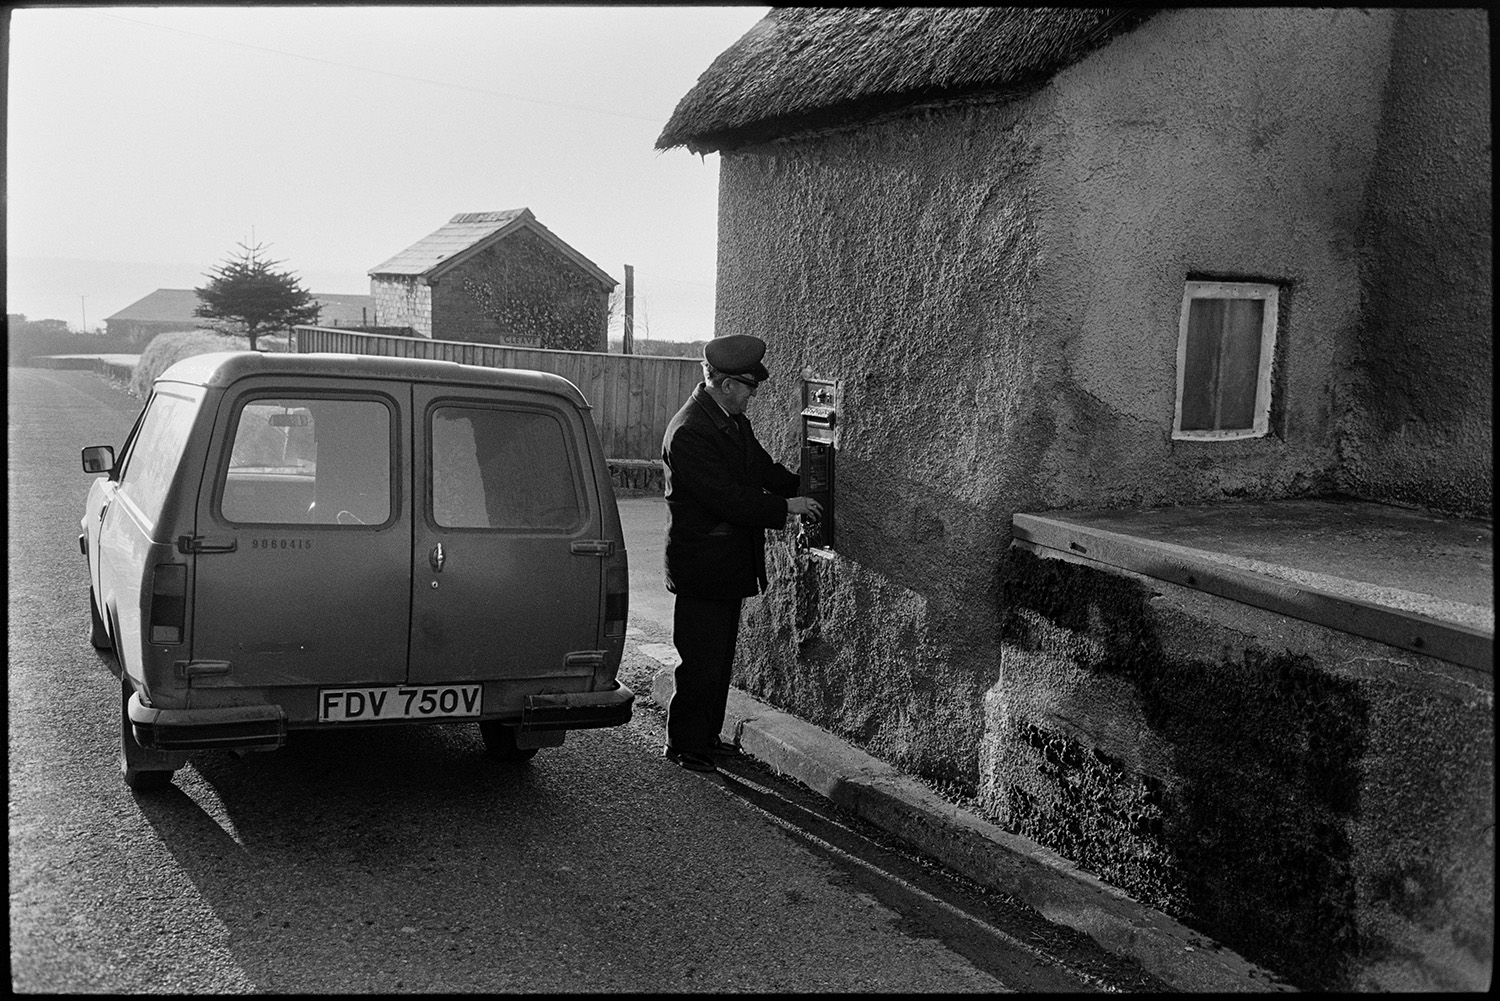 Postman emptying letterbox post, van parked, thatched cottage. 
[A postman collecting letters from a post box set into the wall of a cob cottage, which is also thatched, at Moor End, Burrington. His post van is parked in the road behind him.]